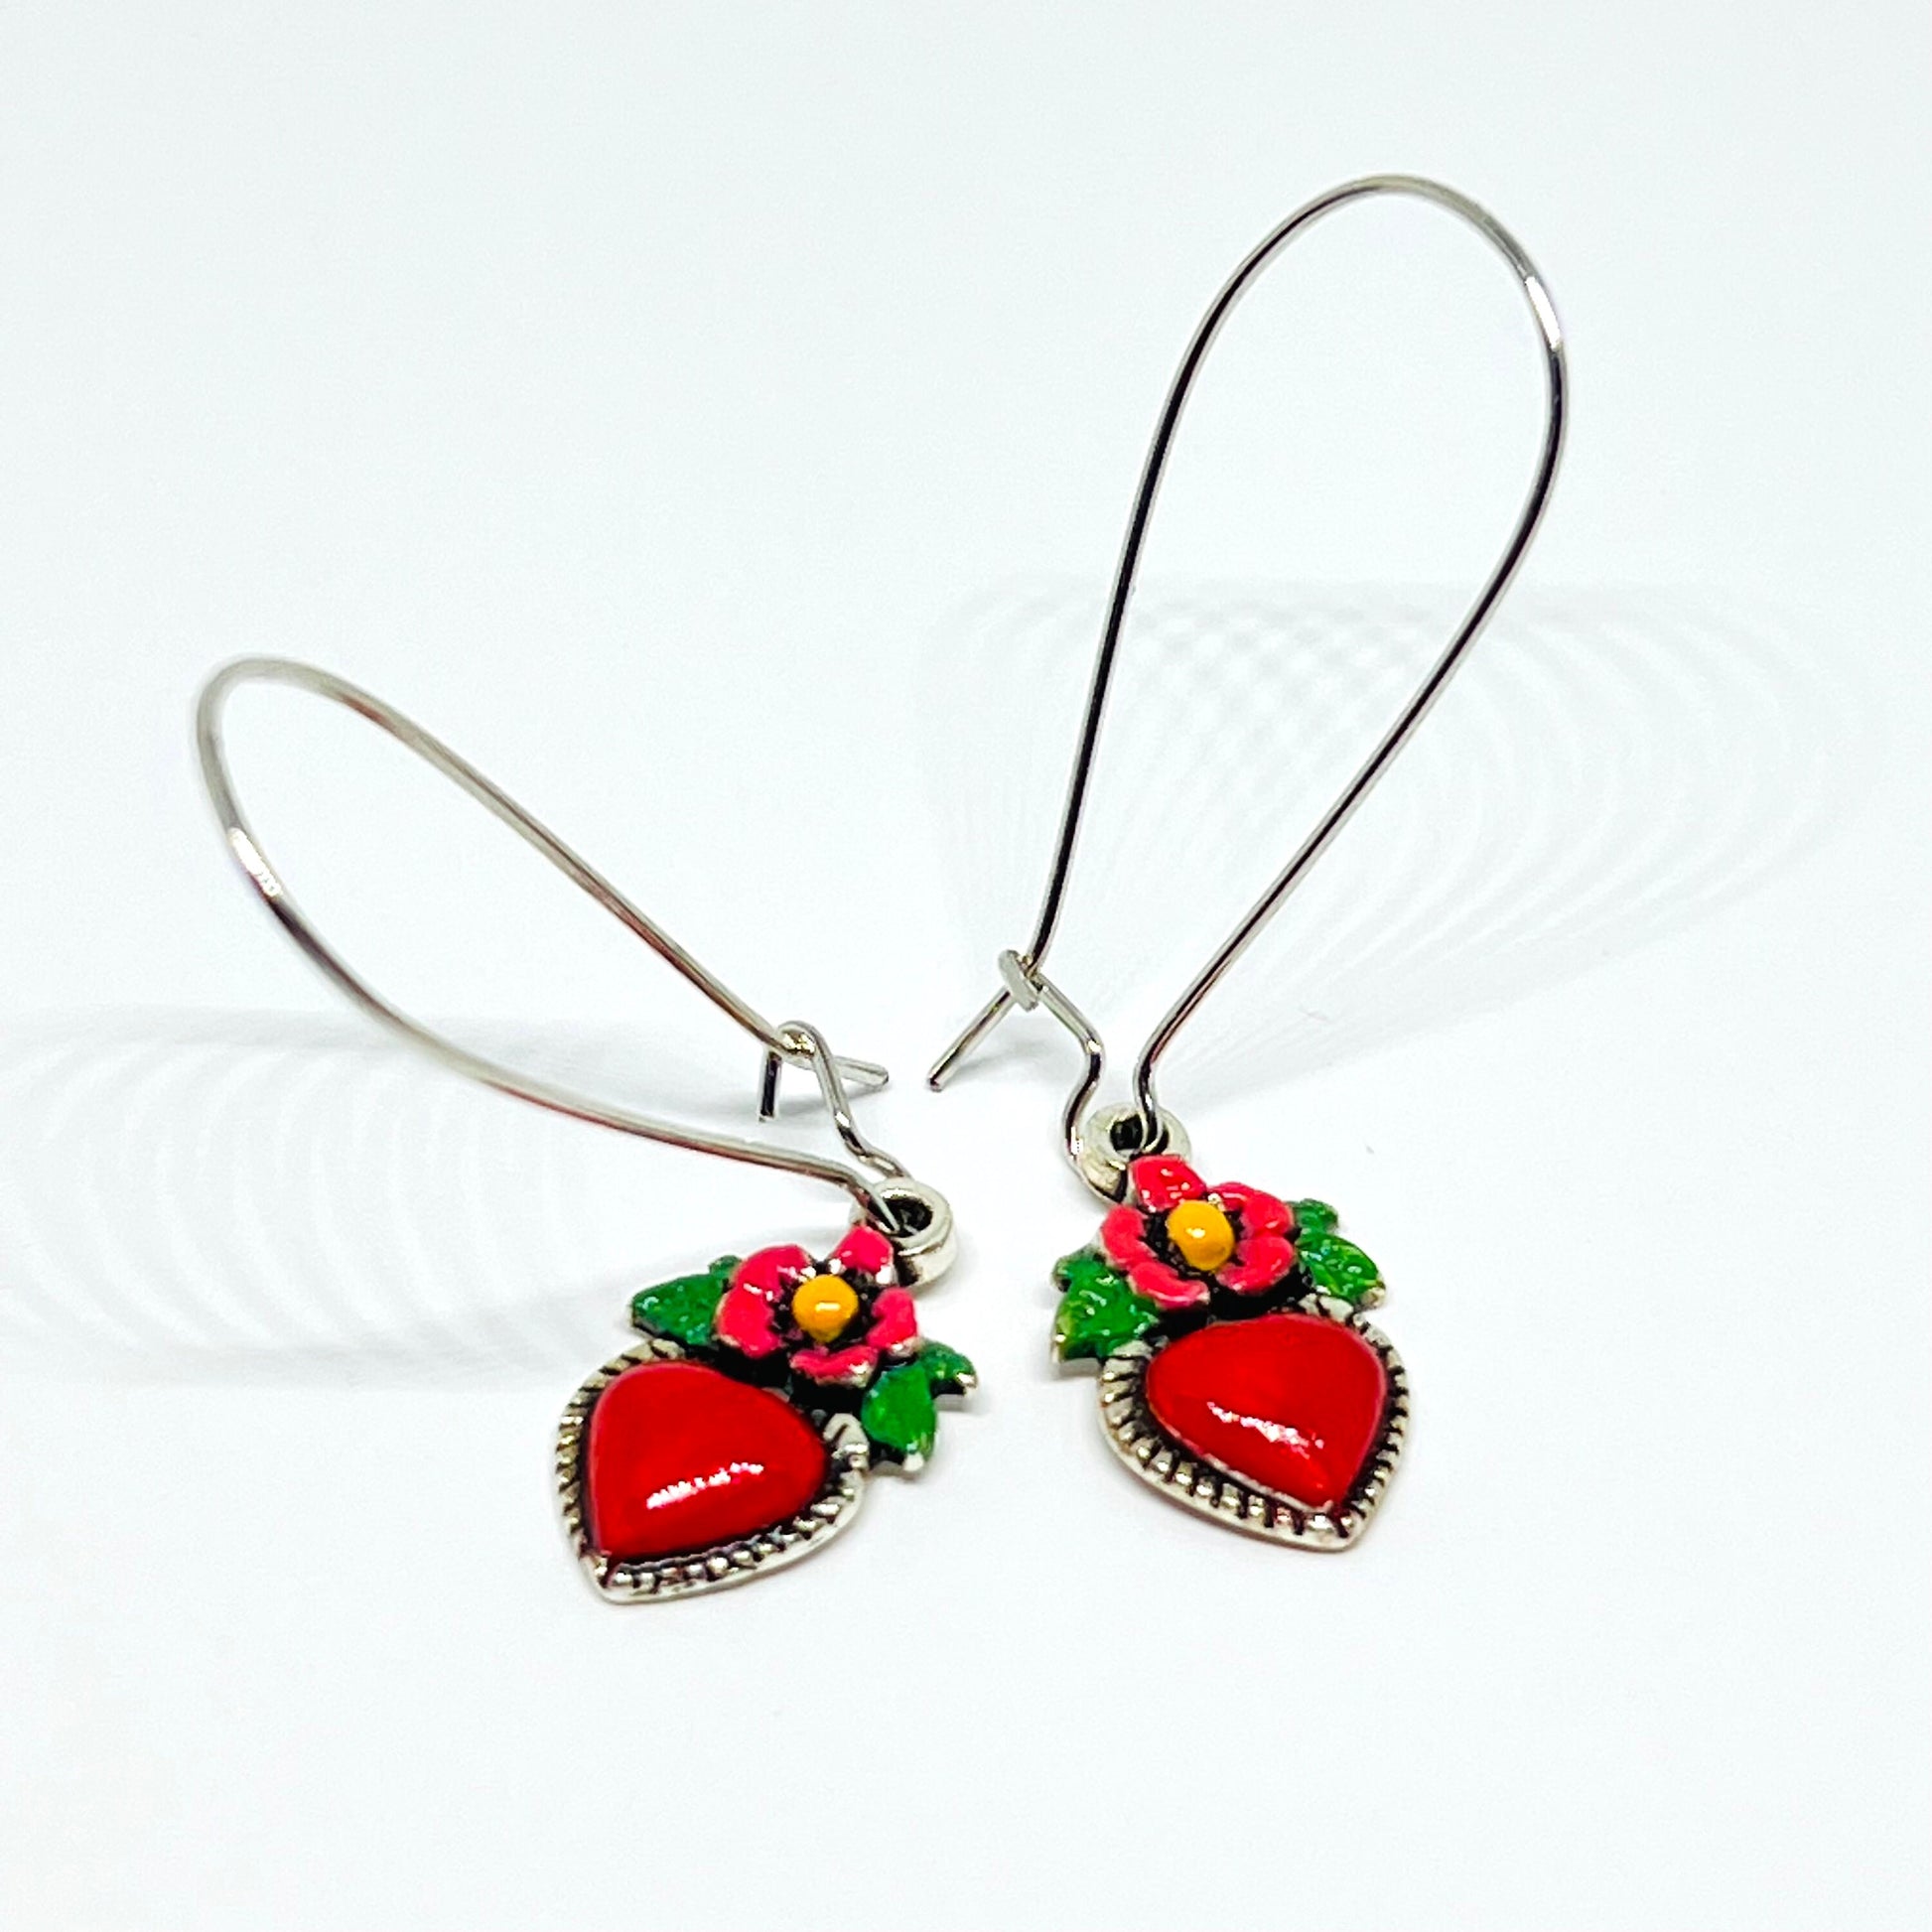 Silver Plated Long Kidney Ear Wires Heart Earrings HandPainted Vintage Style Flowered Hearts Cute Original Girl Woman Gift for Her Christmas